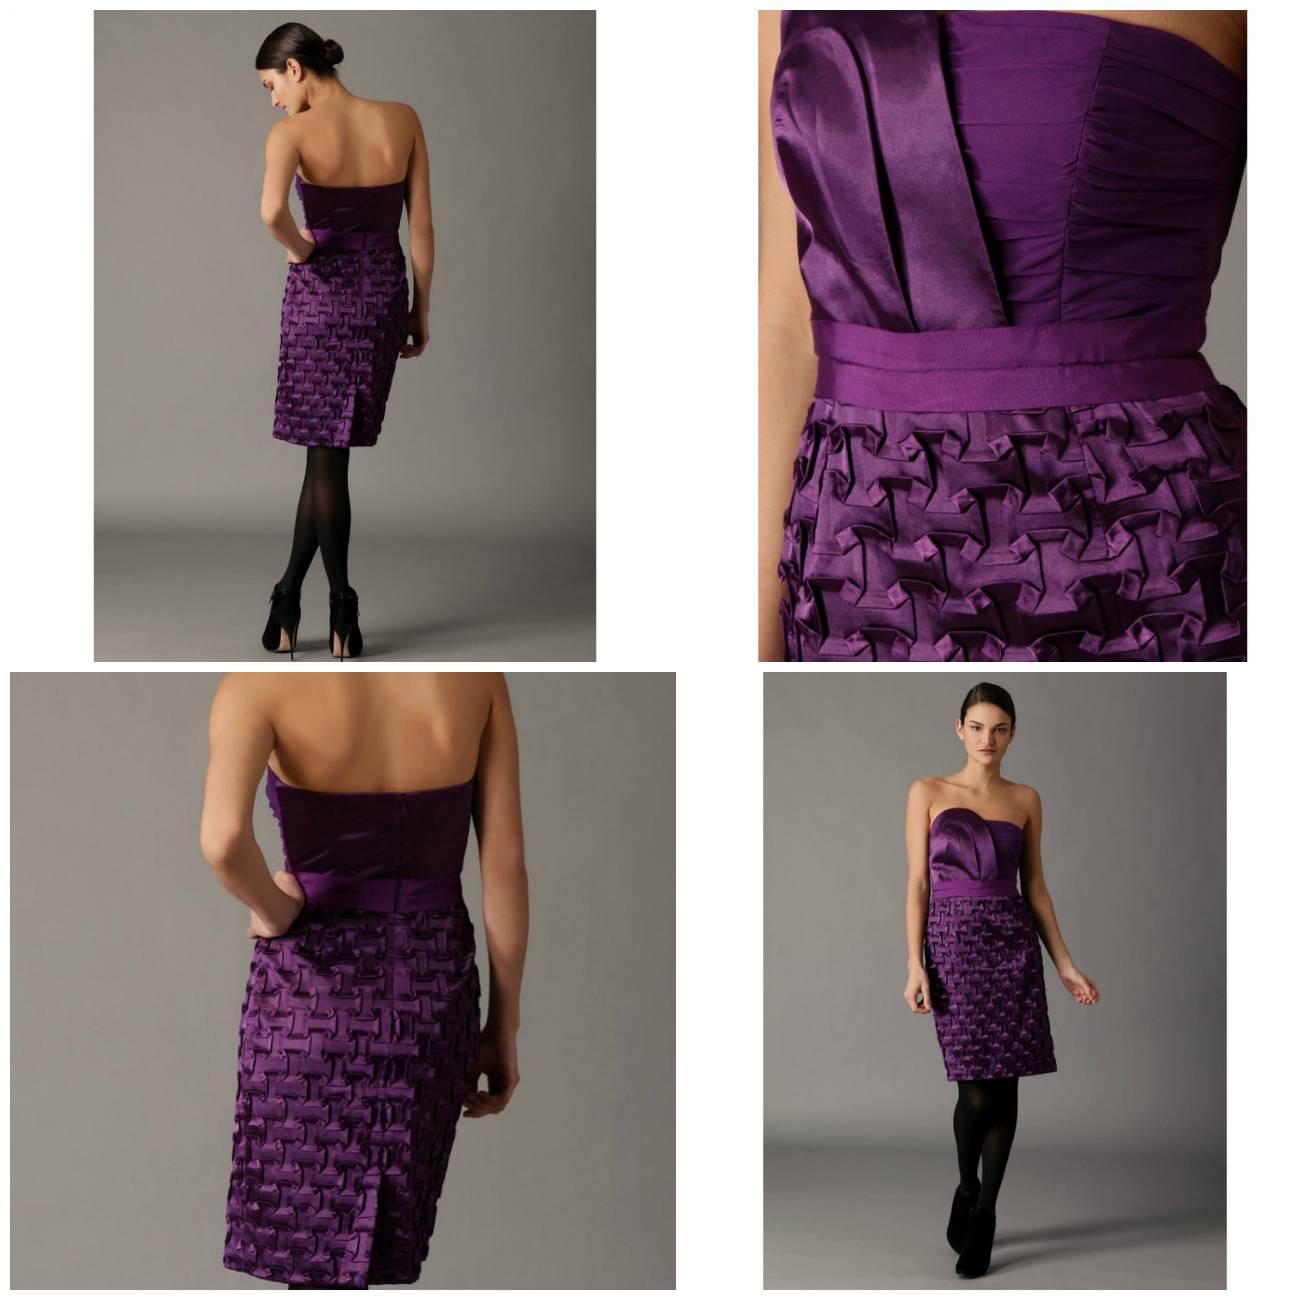 Vivienne Tam Couture Dress
Size: 4
Brand New with Tags
*Gorgeous Grape
*Strapless dress with panel design skirt
*Molded cups and side boning for support
*Hidden back zipper closure
*Grosgrain ribbon waistband
*Fully Lined
*Extended panel at side